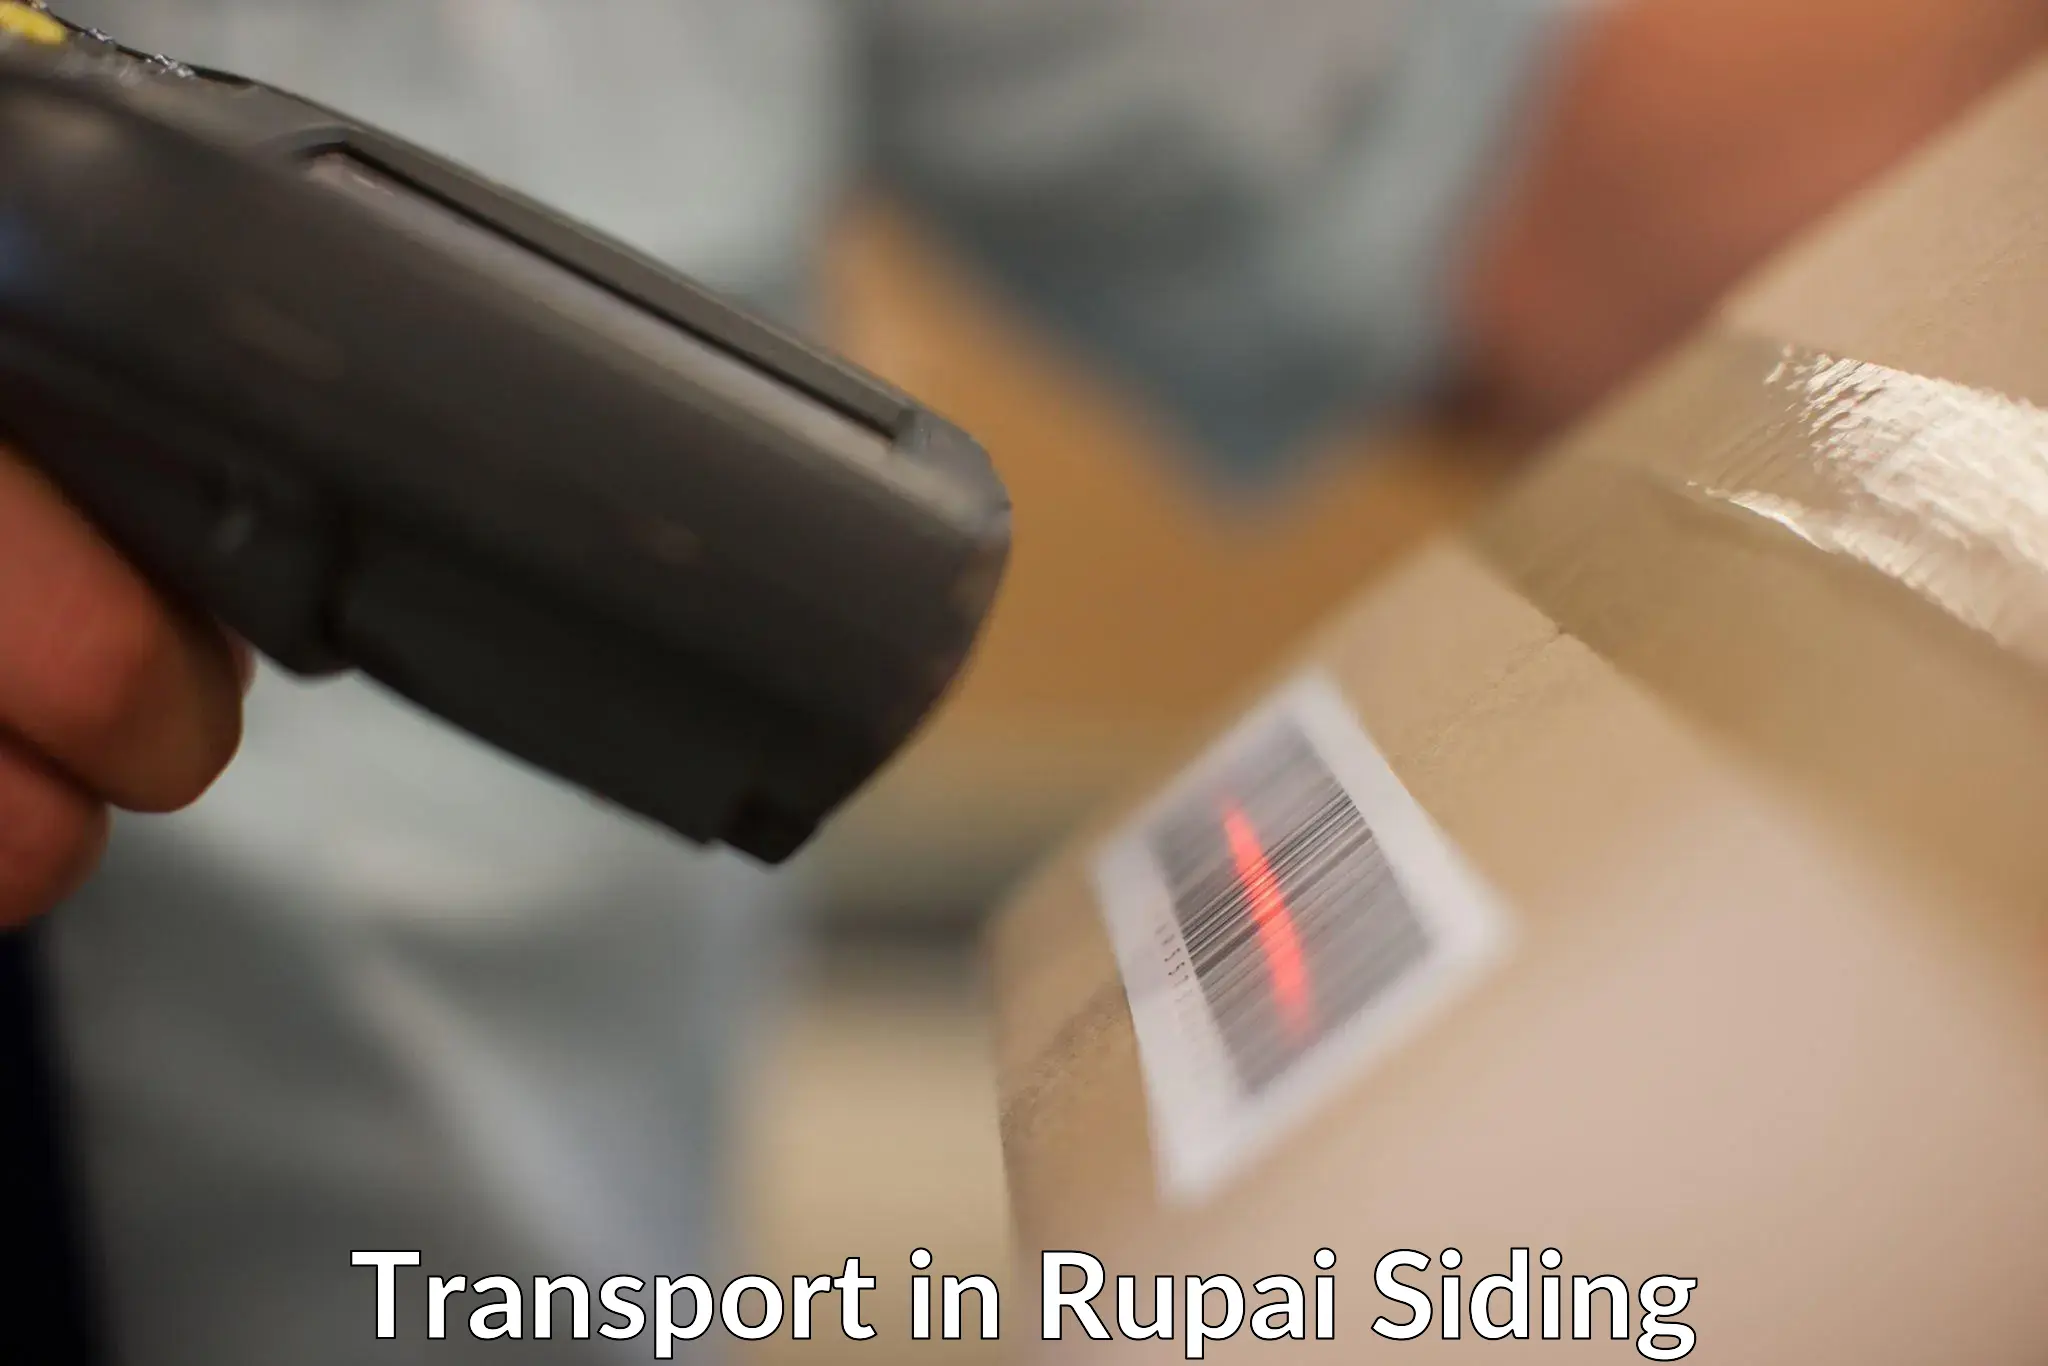 Container transportation services in Rupai Siding